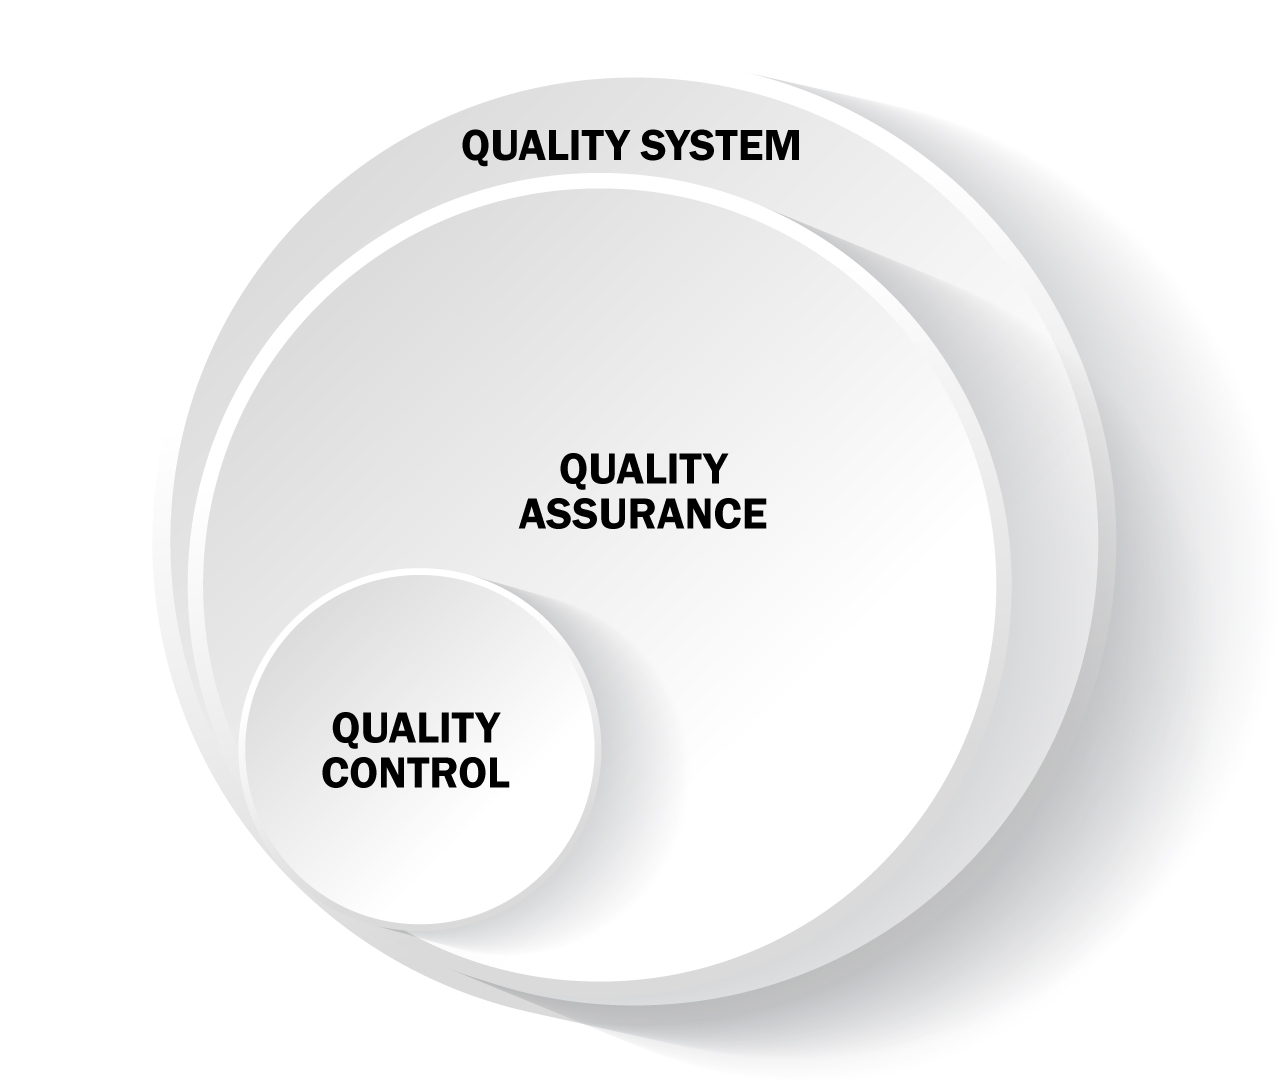 Differences between the three concept, Quality control, quality assurance and quality systems